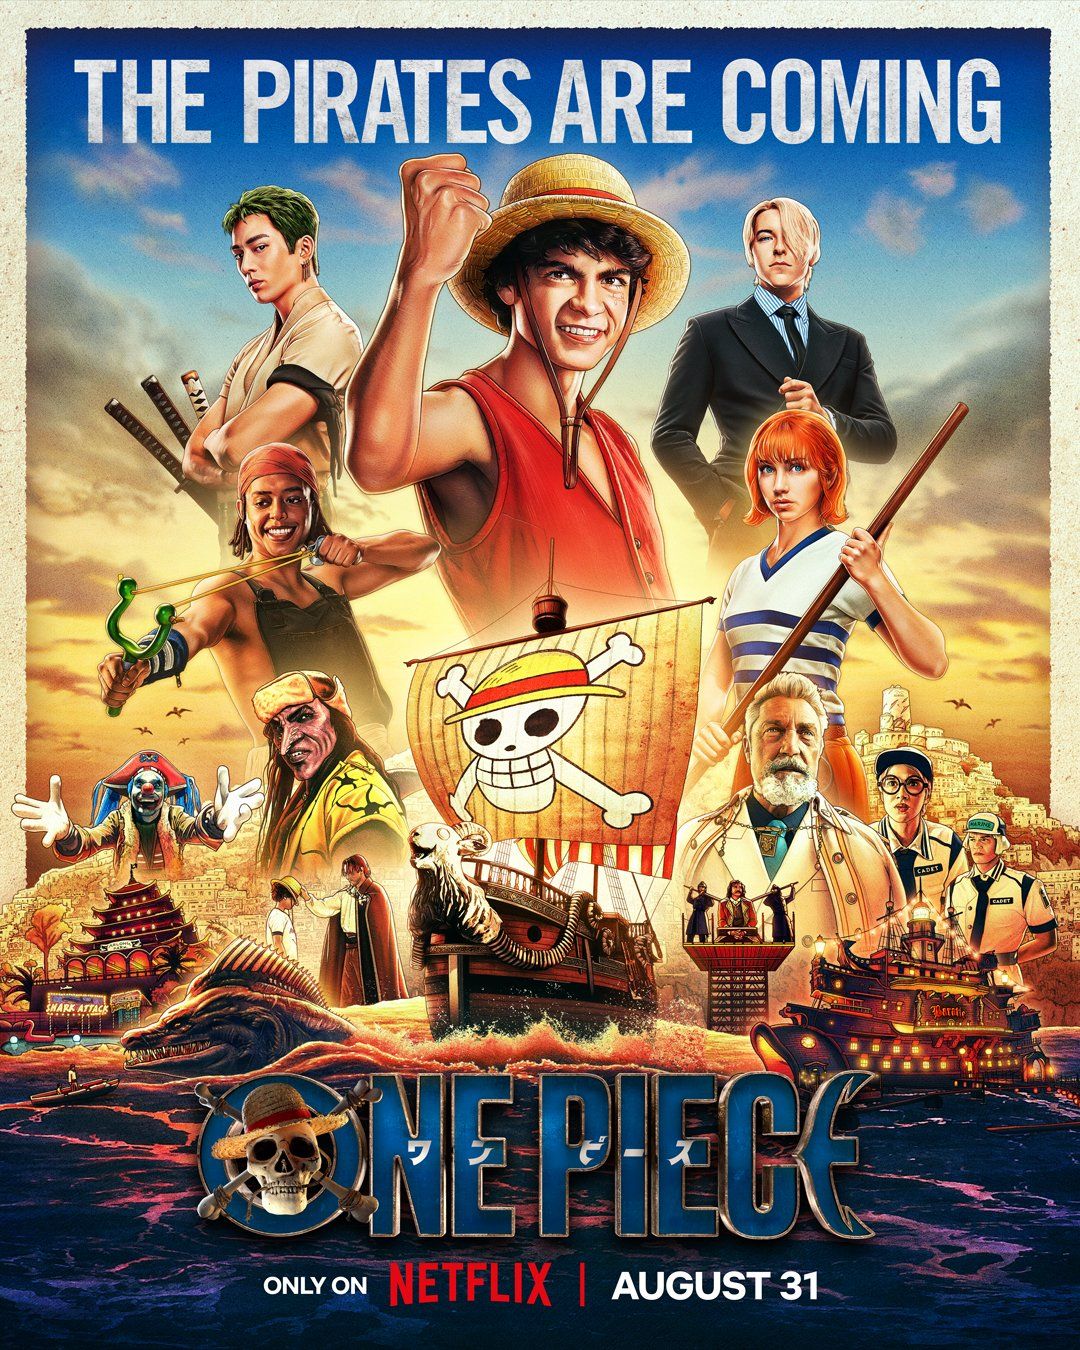 New One Piece Live-Action Poster Teases More Pirate Ships & Locations From Anime